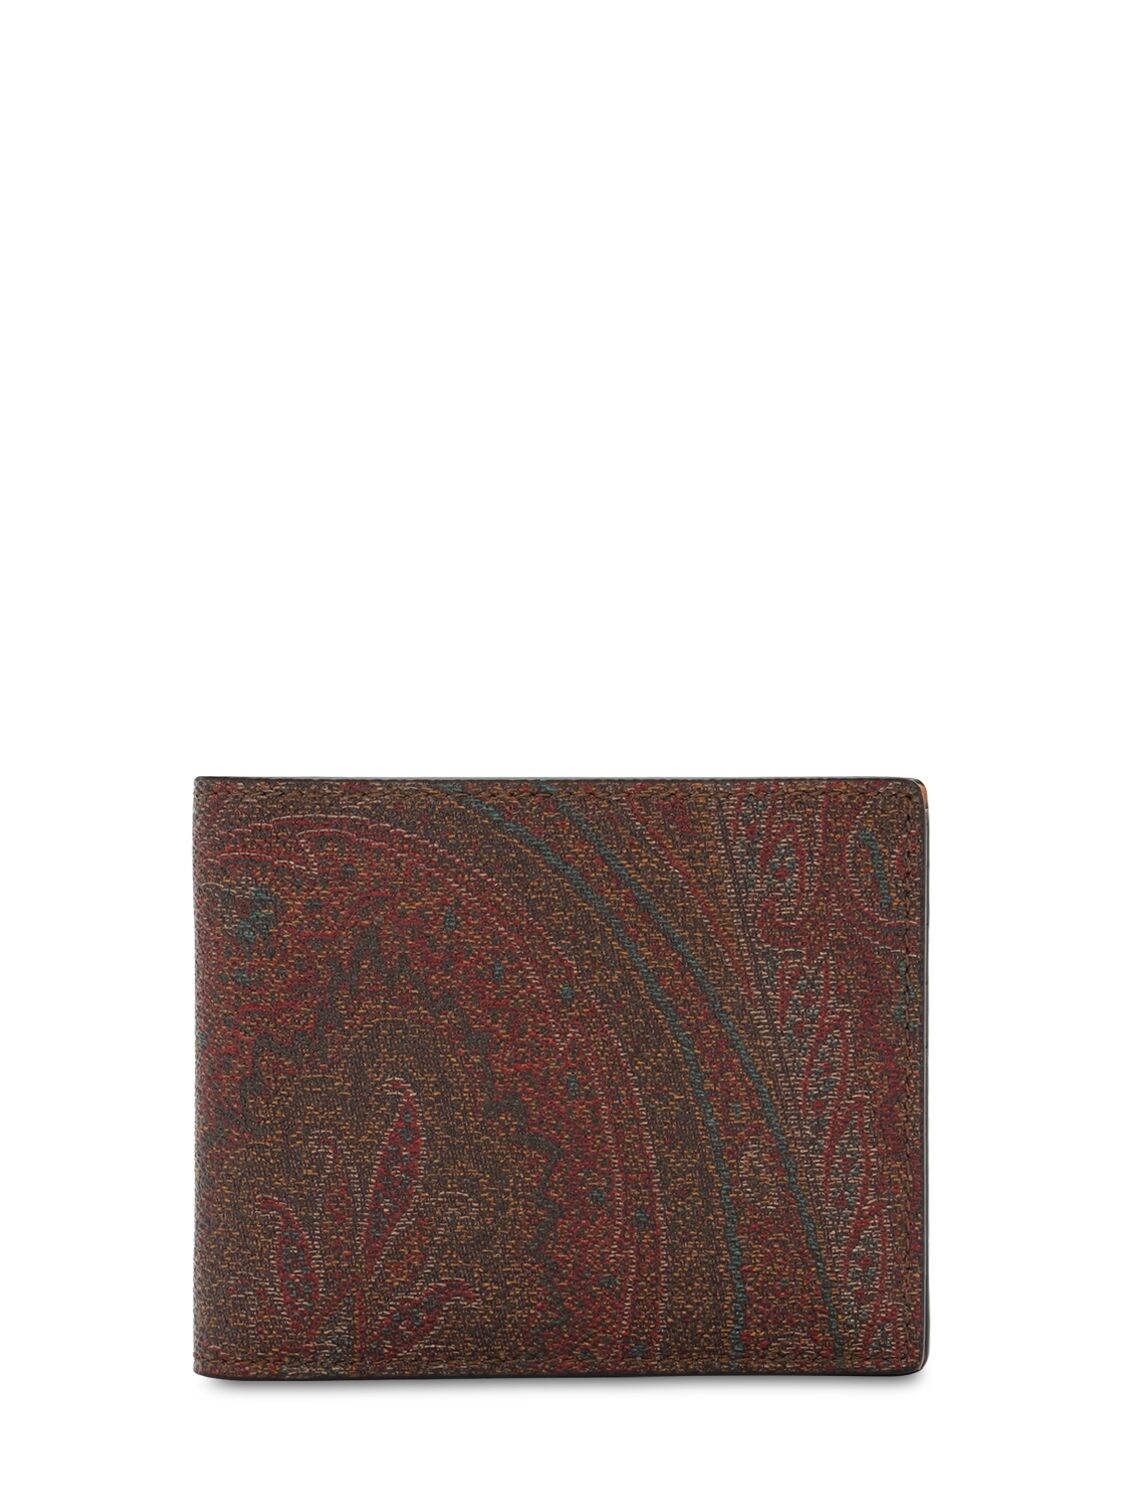 Paisley Print Coated Cotton Wallet